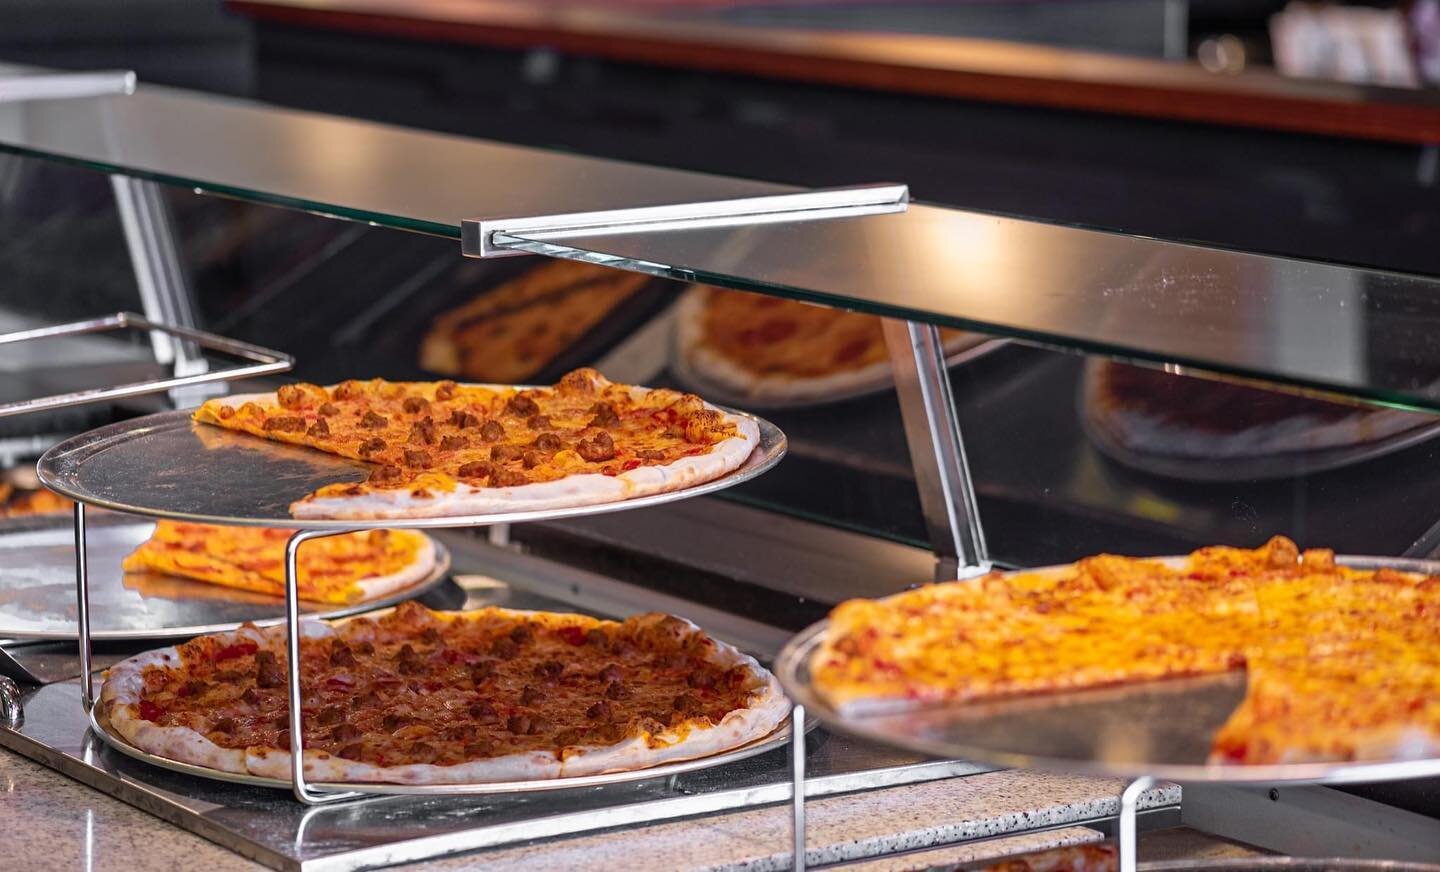 What kind of pizza are you going for? 👀

Let us know down below what your favorite pizza topping is! ⬇️

#417Local #VisitBranson #BransonMO #Eat417 #BransonResturants #bransonresturants